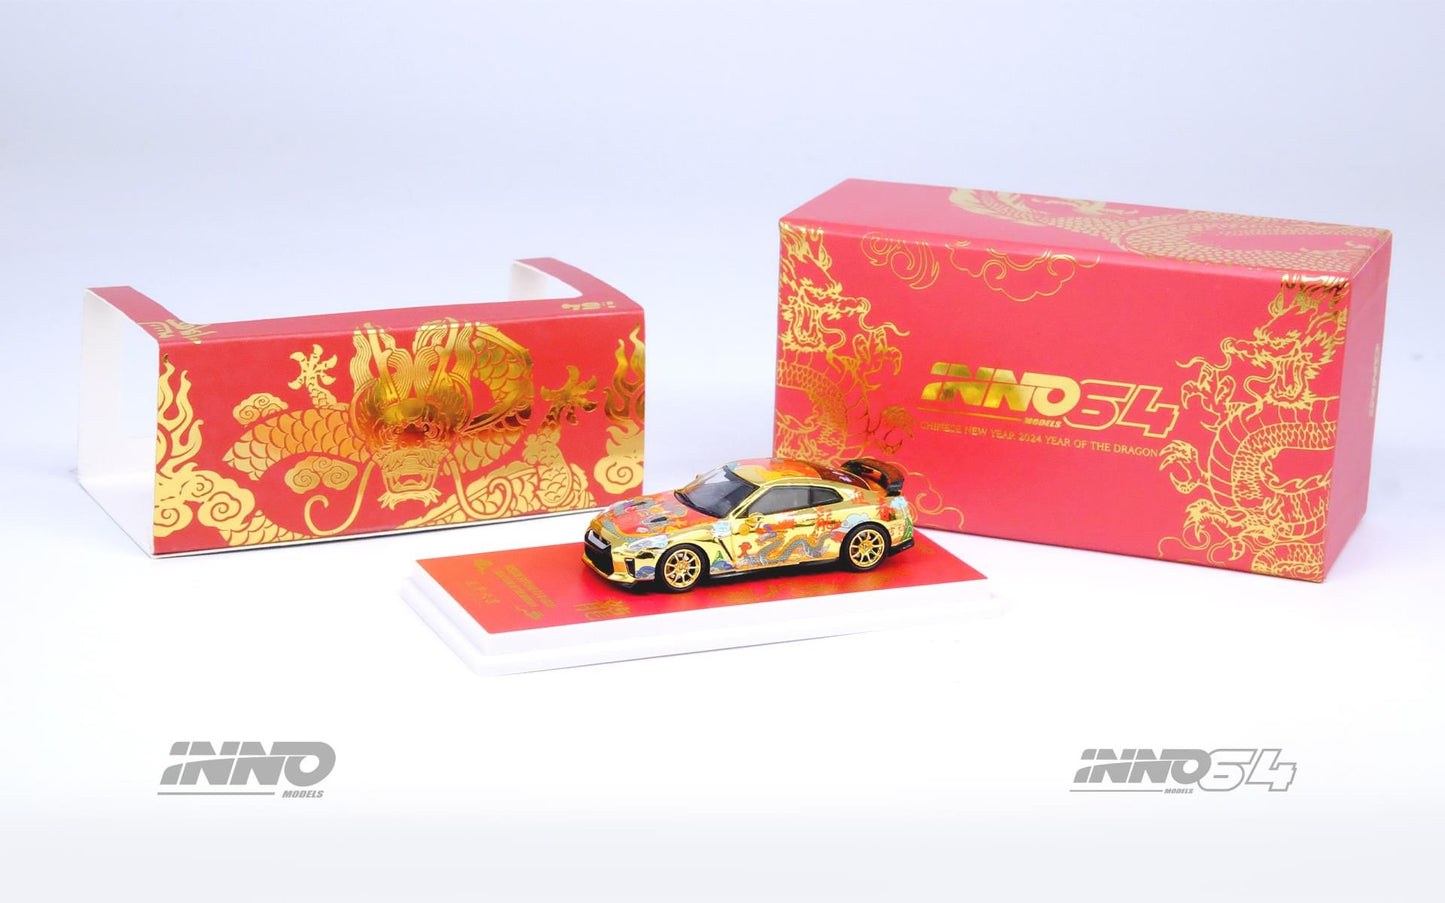 Inno64 1:64 Nissan GT-R R35 “Year Of The Dragon” Chinese New Year 2024 Special Edition